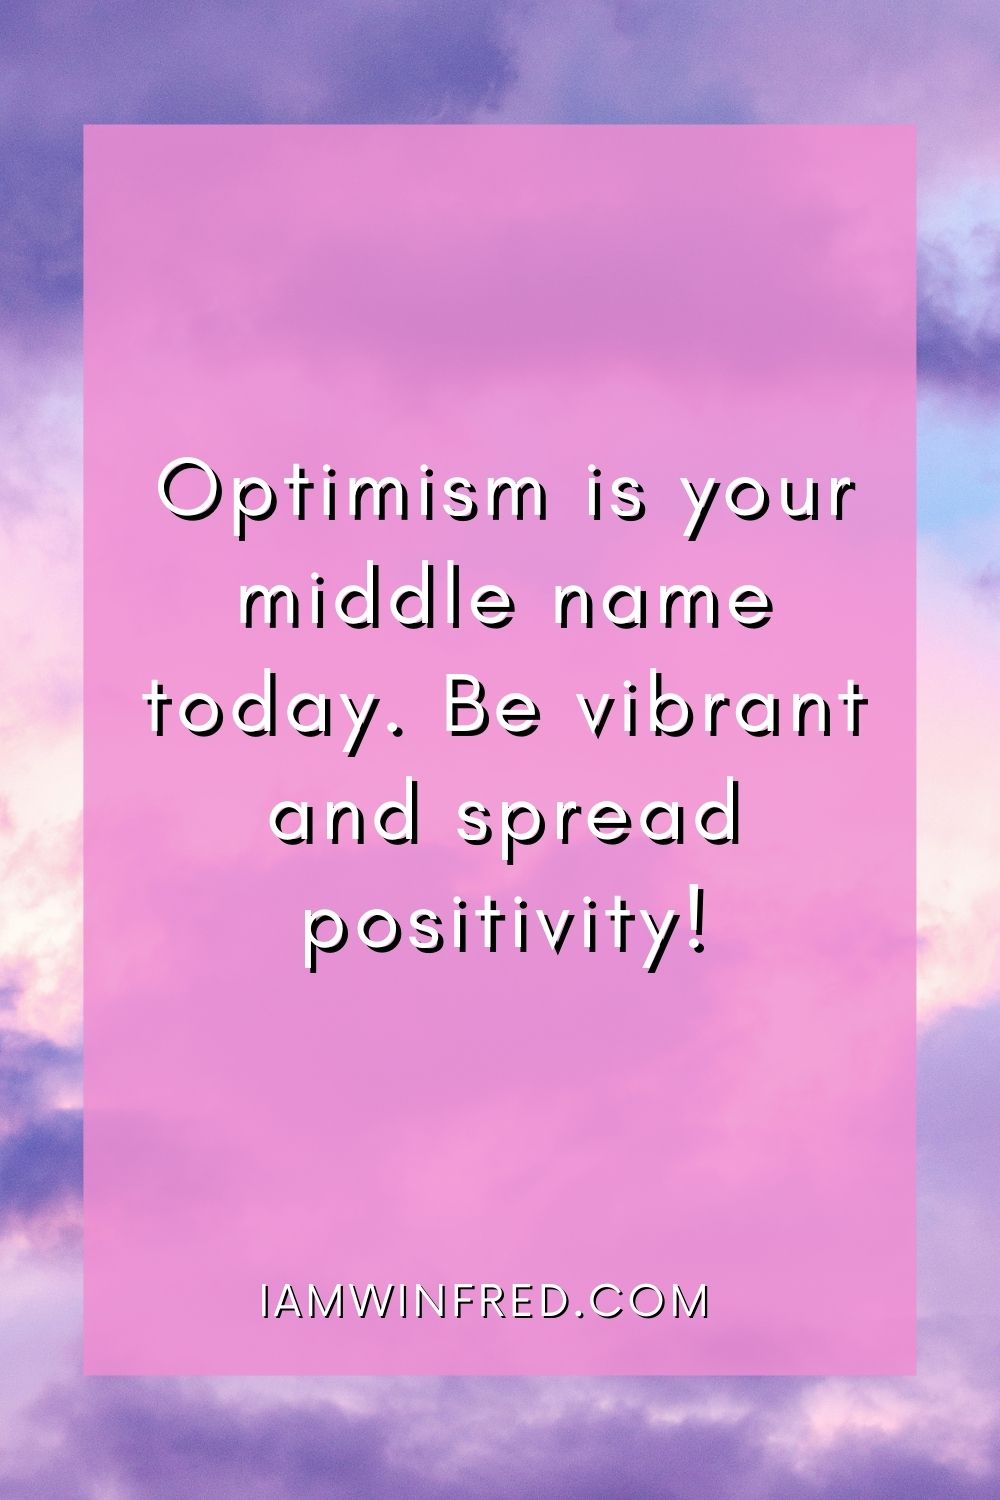 Optimism Is Your Middle Name Today. Be Vibrant And Spread Positivity